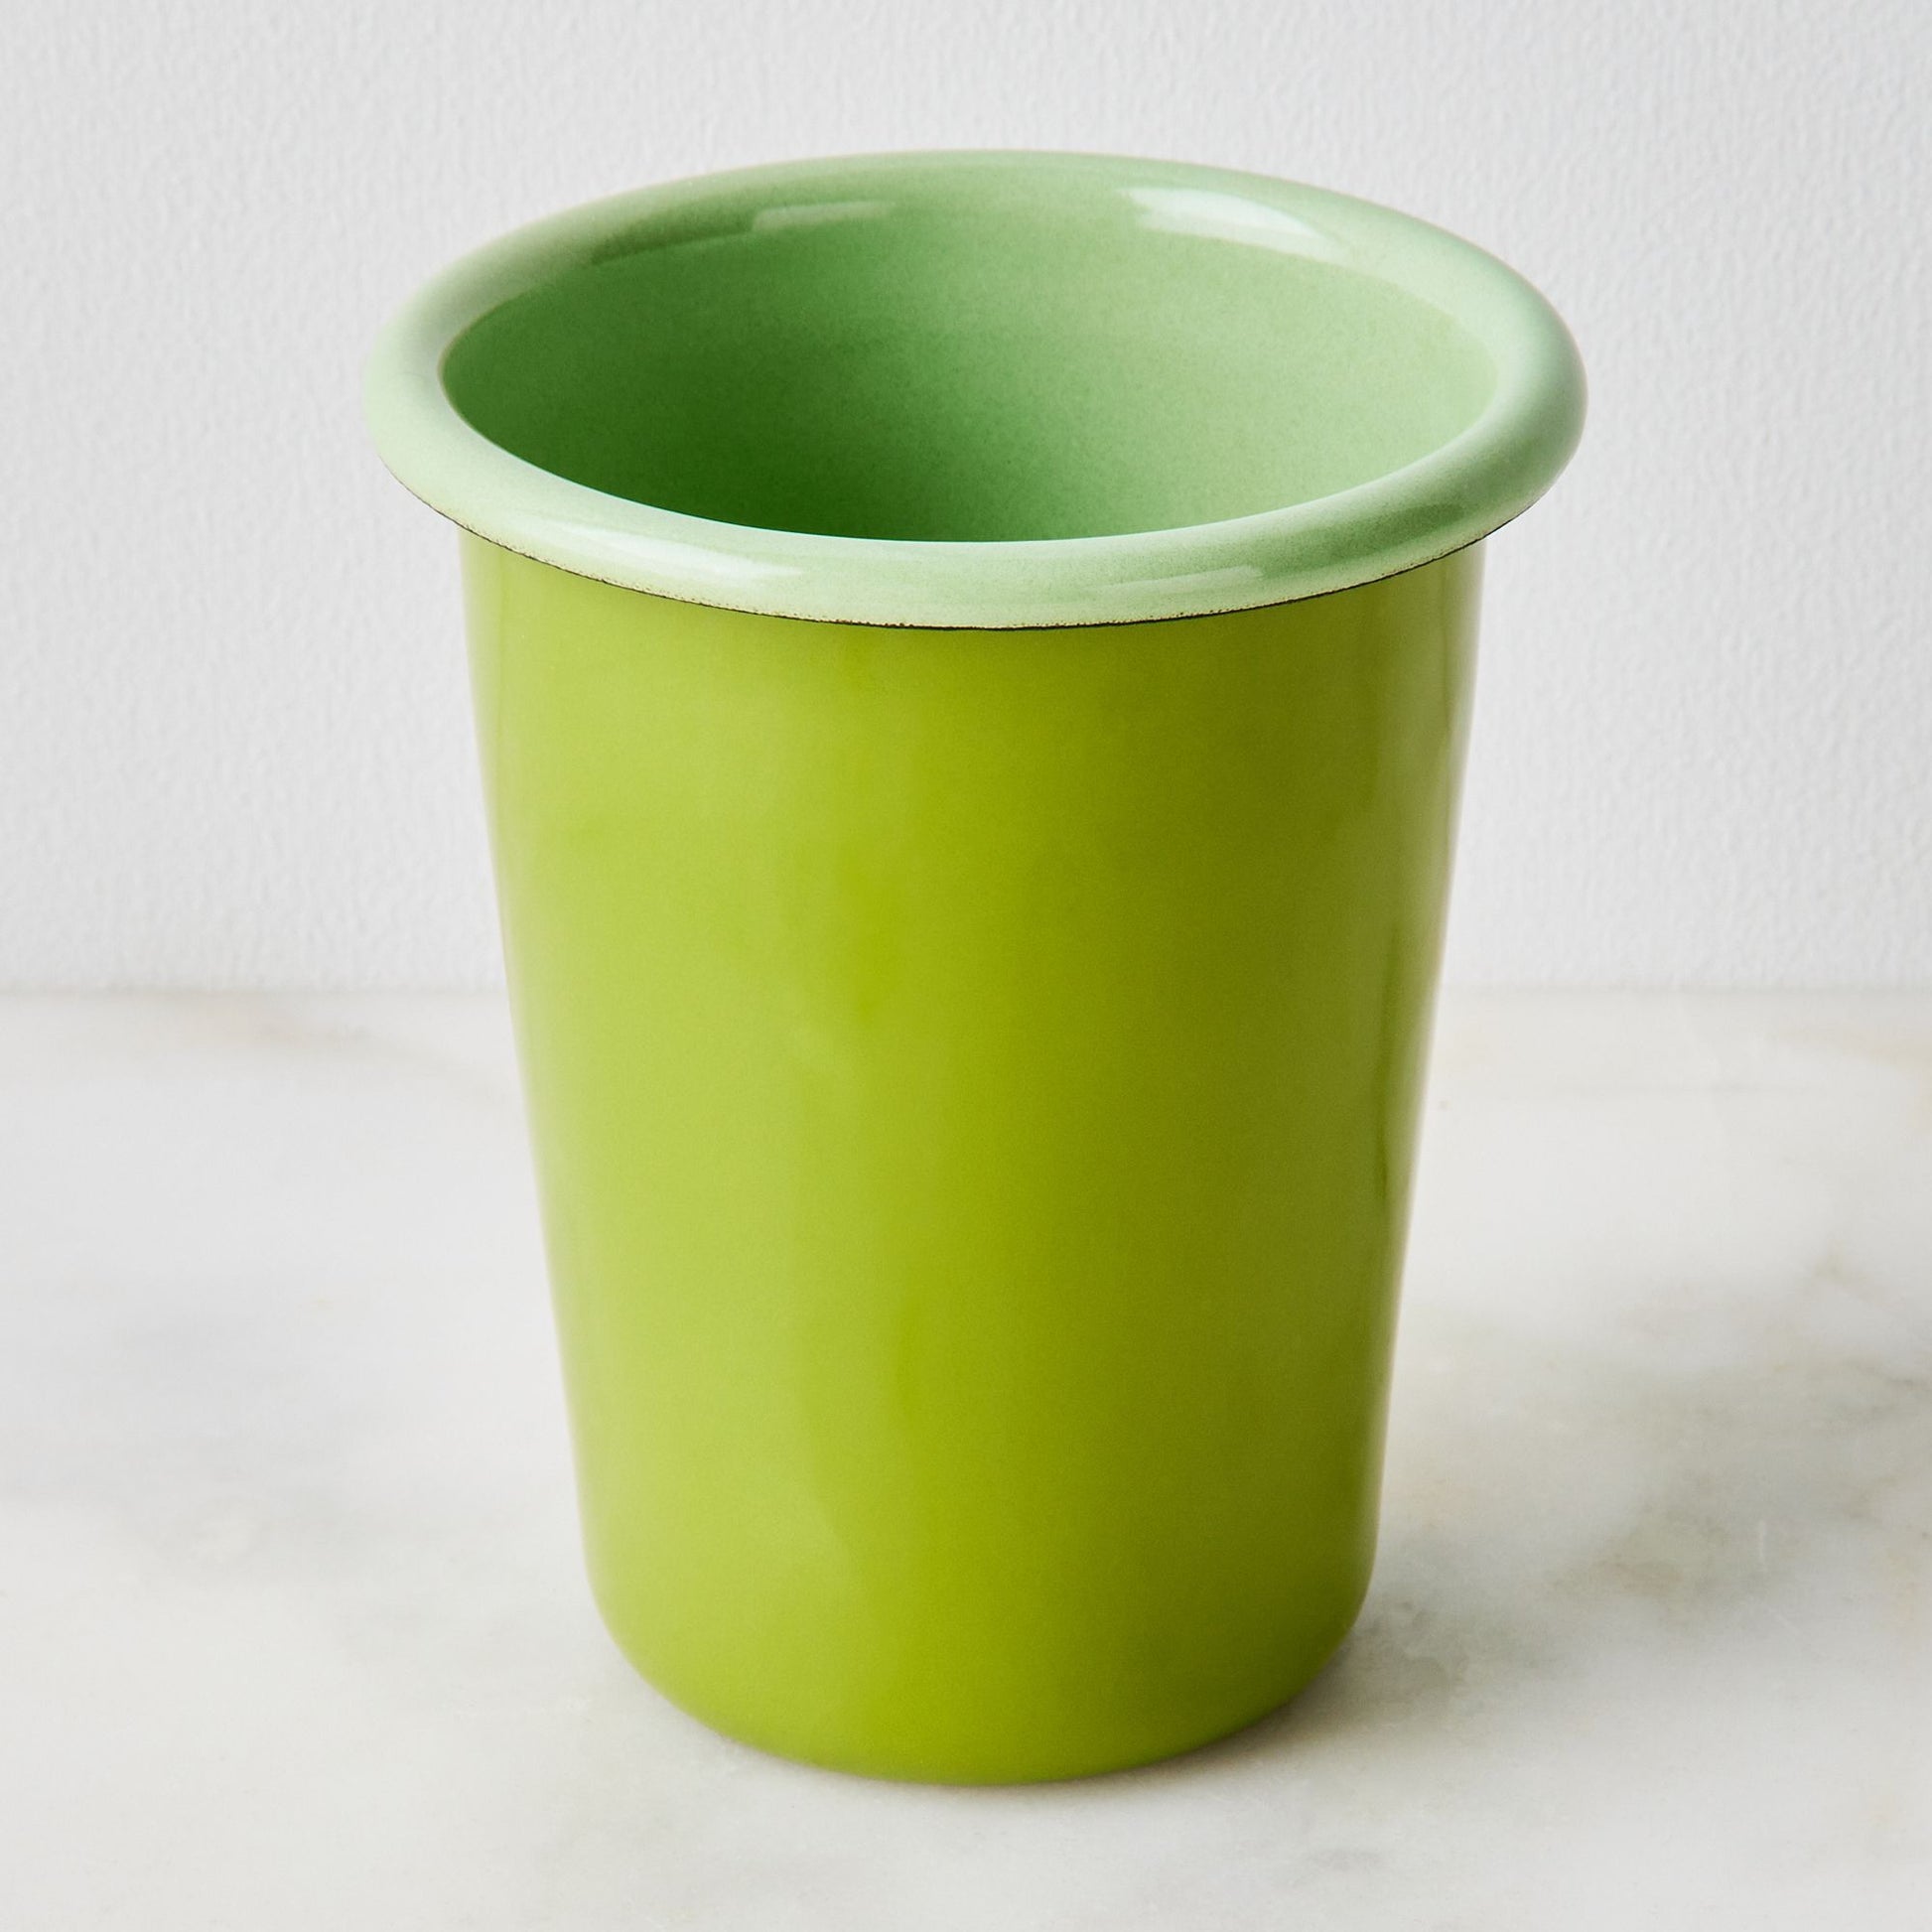 https://conwaykitchen.com/cdn/shop/files/71b59e1c-4aa2-409f-8f85-96652e21818c--2023-0328_crow-canyon_color-pop-enamel-tumblers-set-of-4_the-get-out-x-cch-8-oz-small-tumblers-set-of-4-apple-and-mint_silo_1x1_ty-mecham.jpg?v=1687996045&width=1946